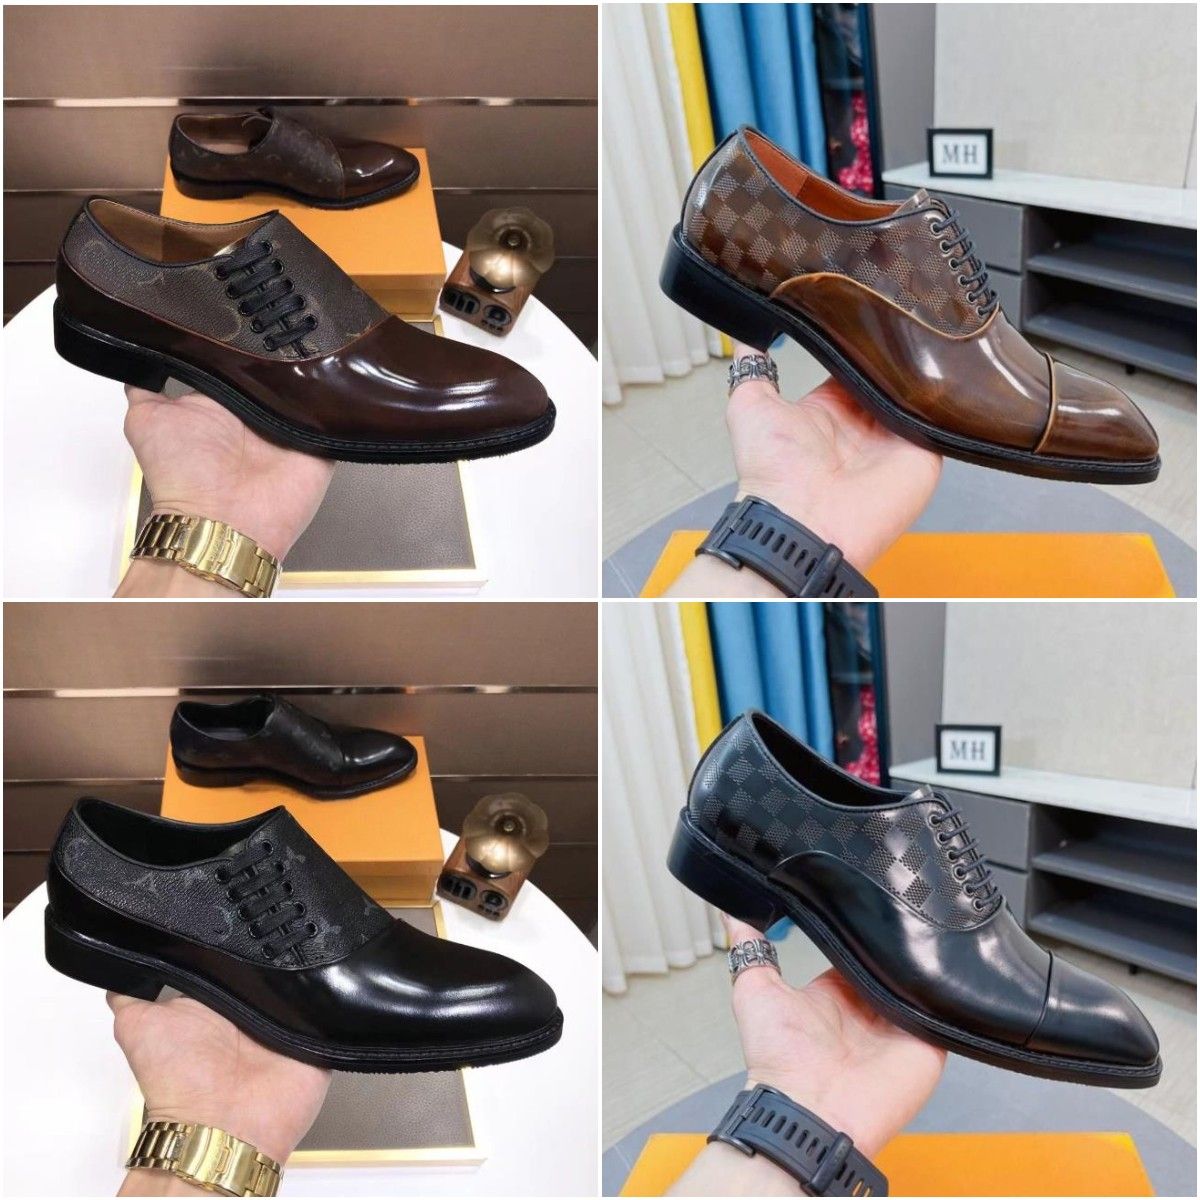 Minister Derby Shoes Designers Major Loafers Men Leather Dress Shoe Fashion  Driver Party Black Laofer Dress Shoes Size 39 45 From Wangshoes8, $73.12